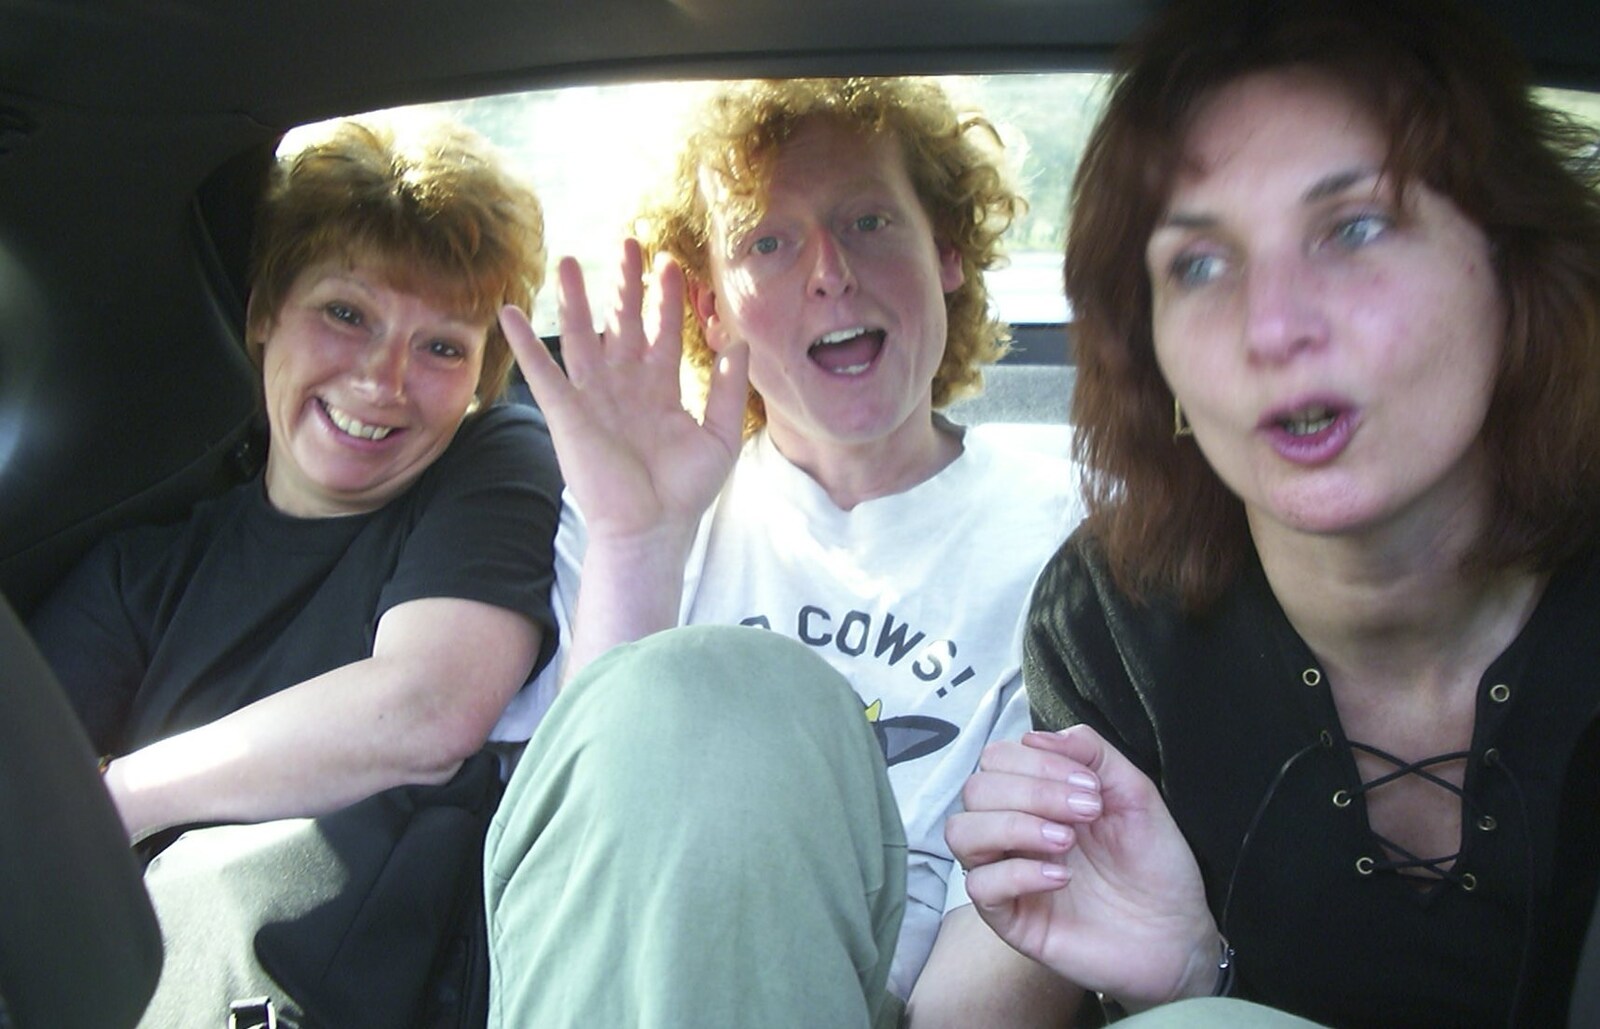 Carolyn on Sunday, Wymondham, Norfolk - 23rd March 2003: Jenny, Wavy and Anne pack in to the back of Carolyn's car